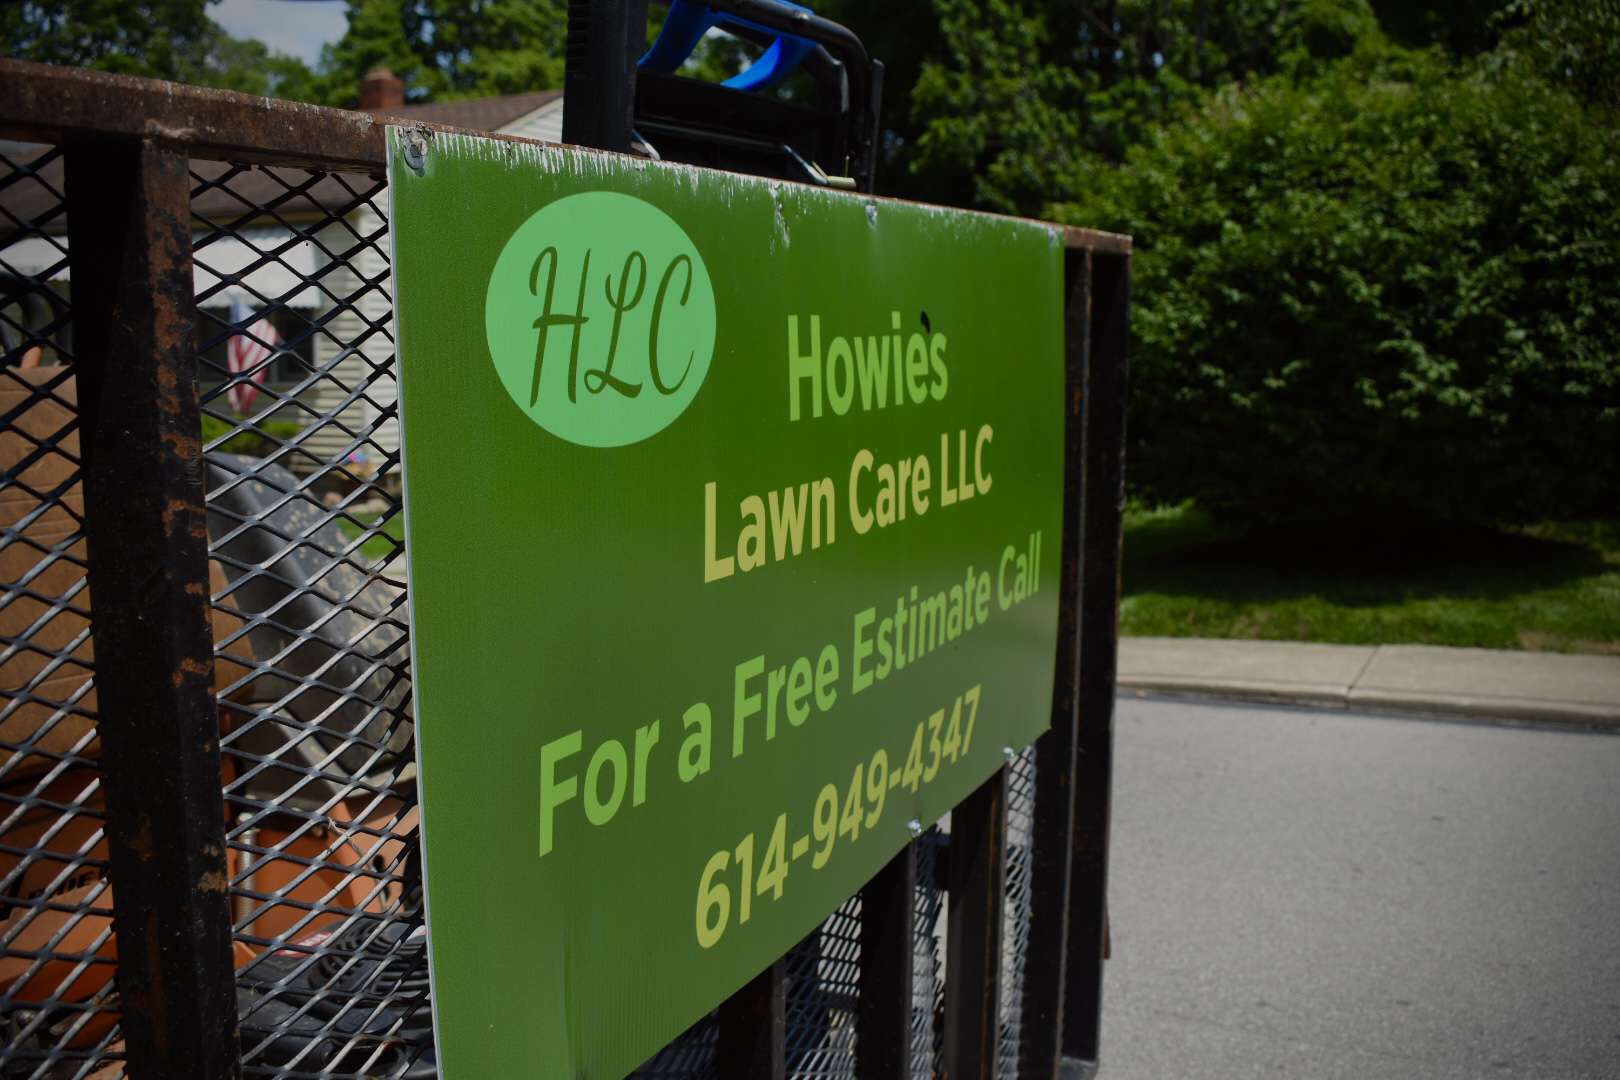 Howies Lawn Care LLC